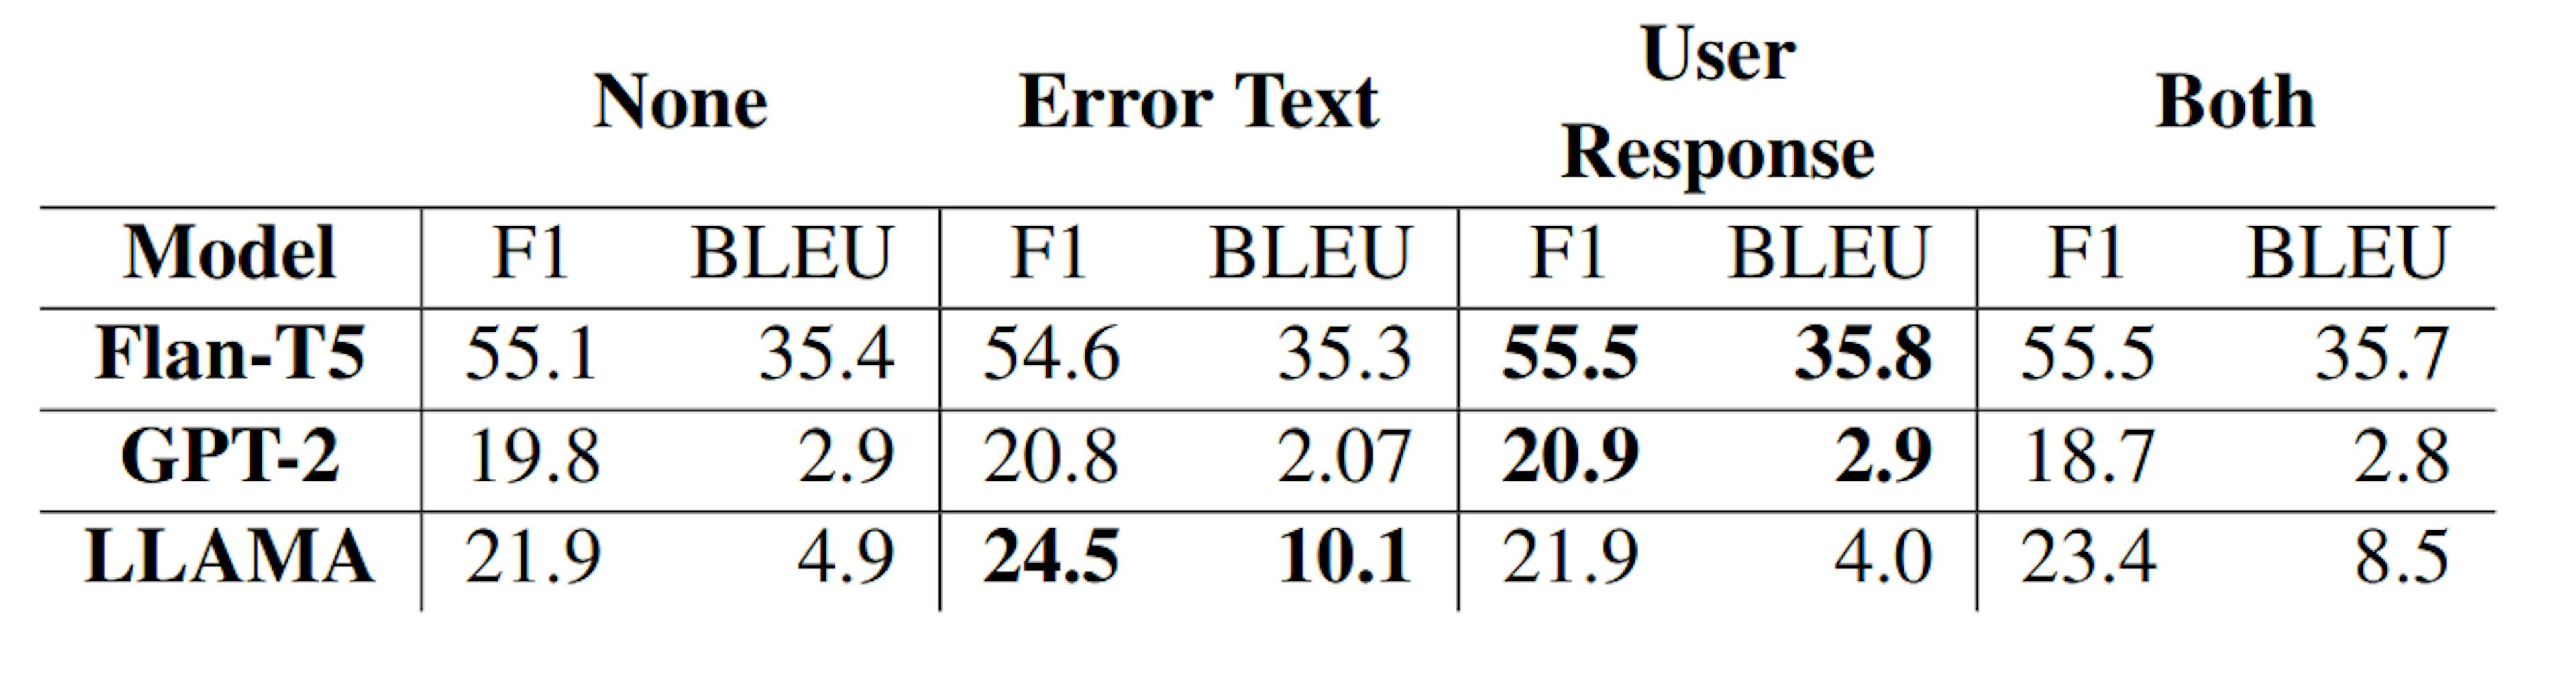 Table 11: Experiments with errors in system utterances and subsequent user reactions as additional input signals. For each model, the best performing configuration is highlighted. Both includes both feedback signals as additional input signal. None was just continually trained on the 188 dialogs, without including the feedback.